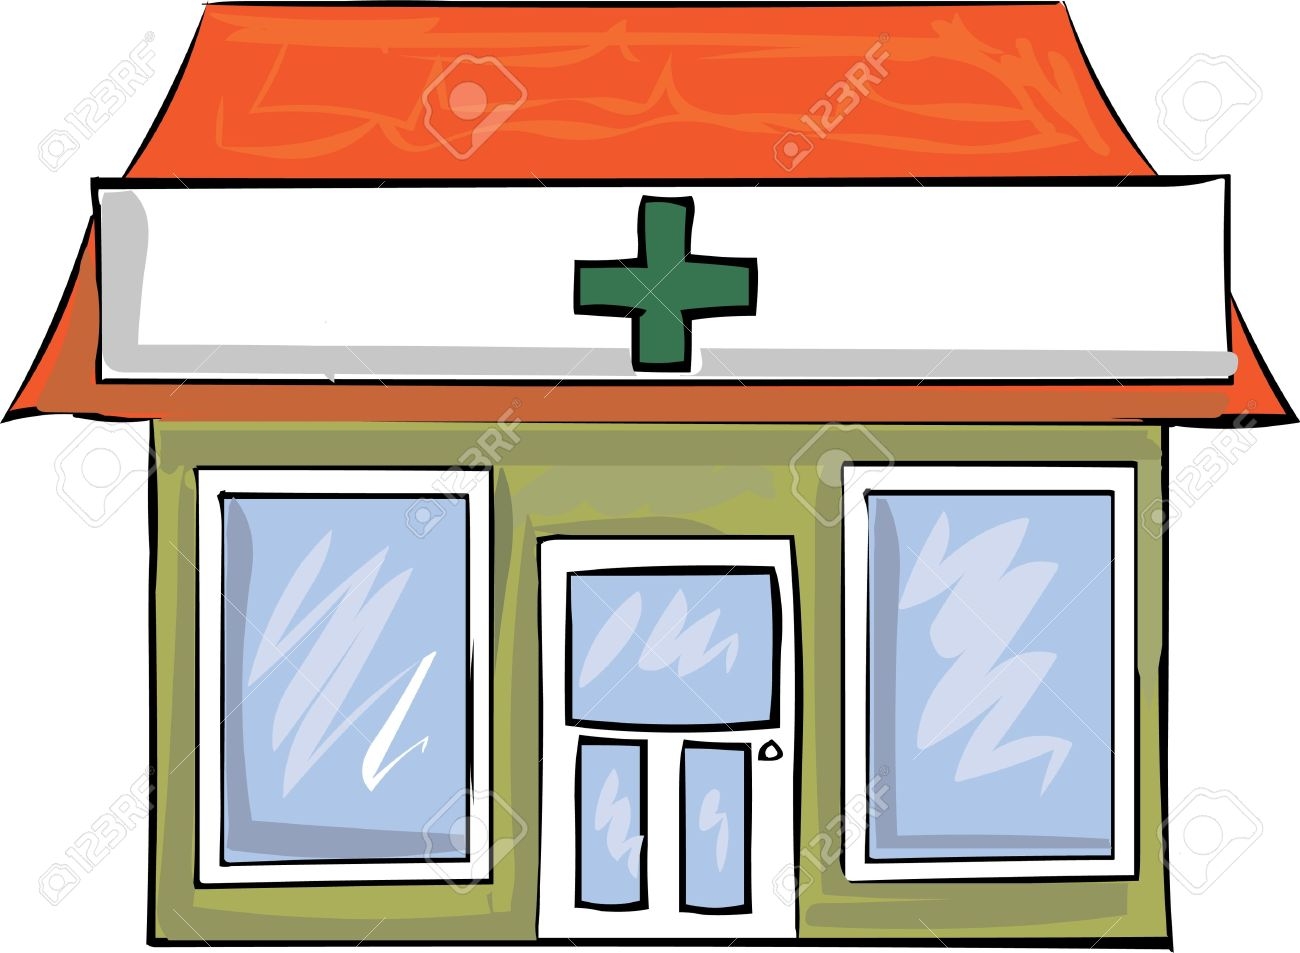 Centers clipart health.  collection of community